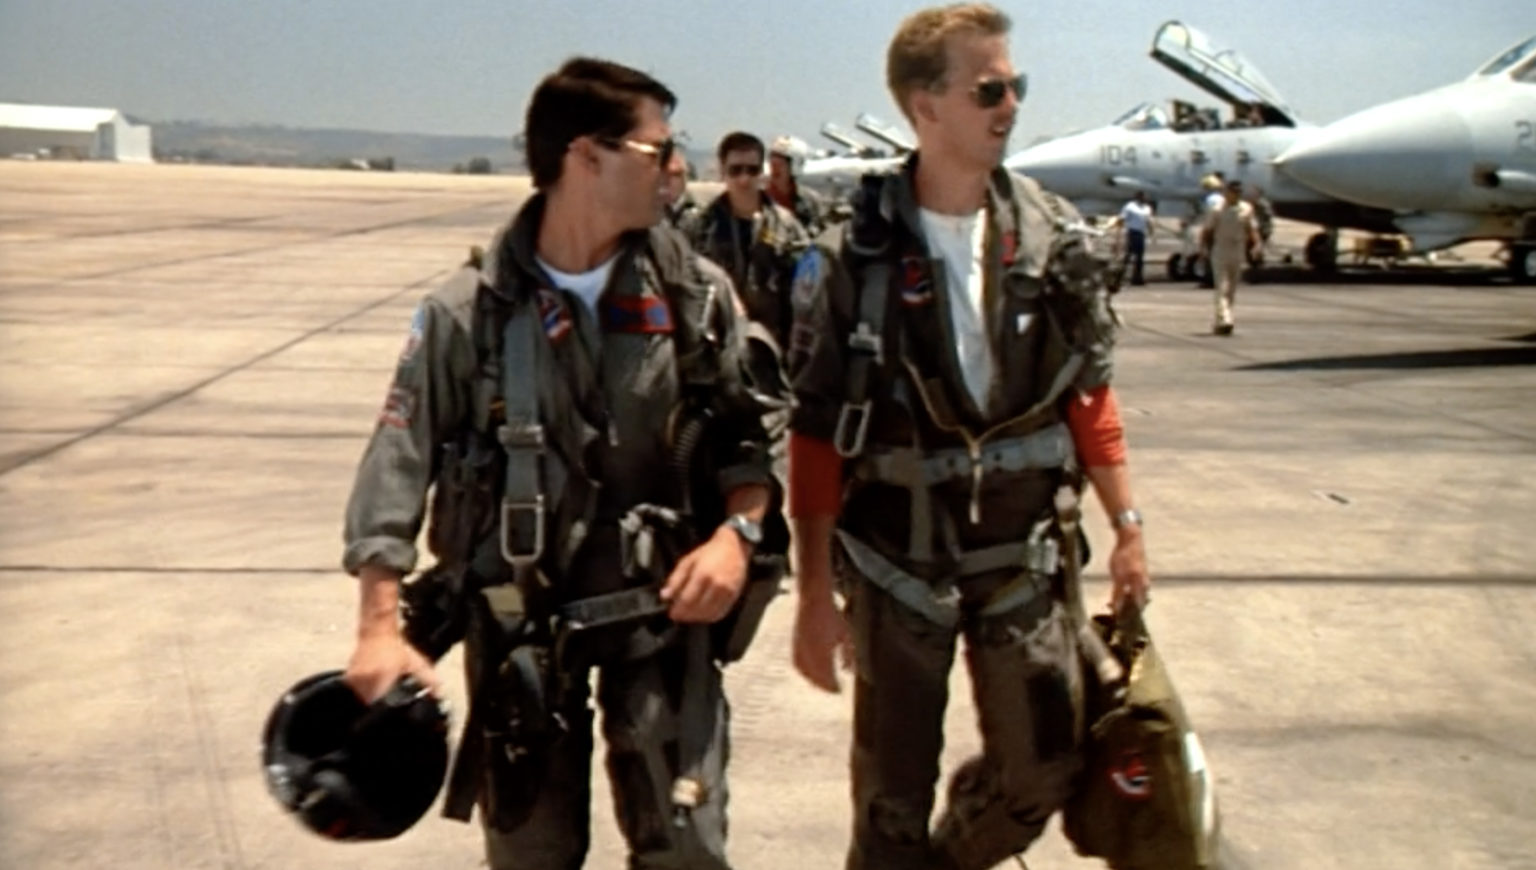 Farewell To A Legend: Goose Has Died In 'Top Gun' .